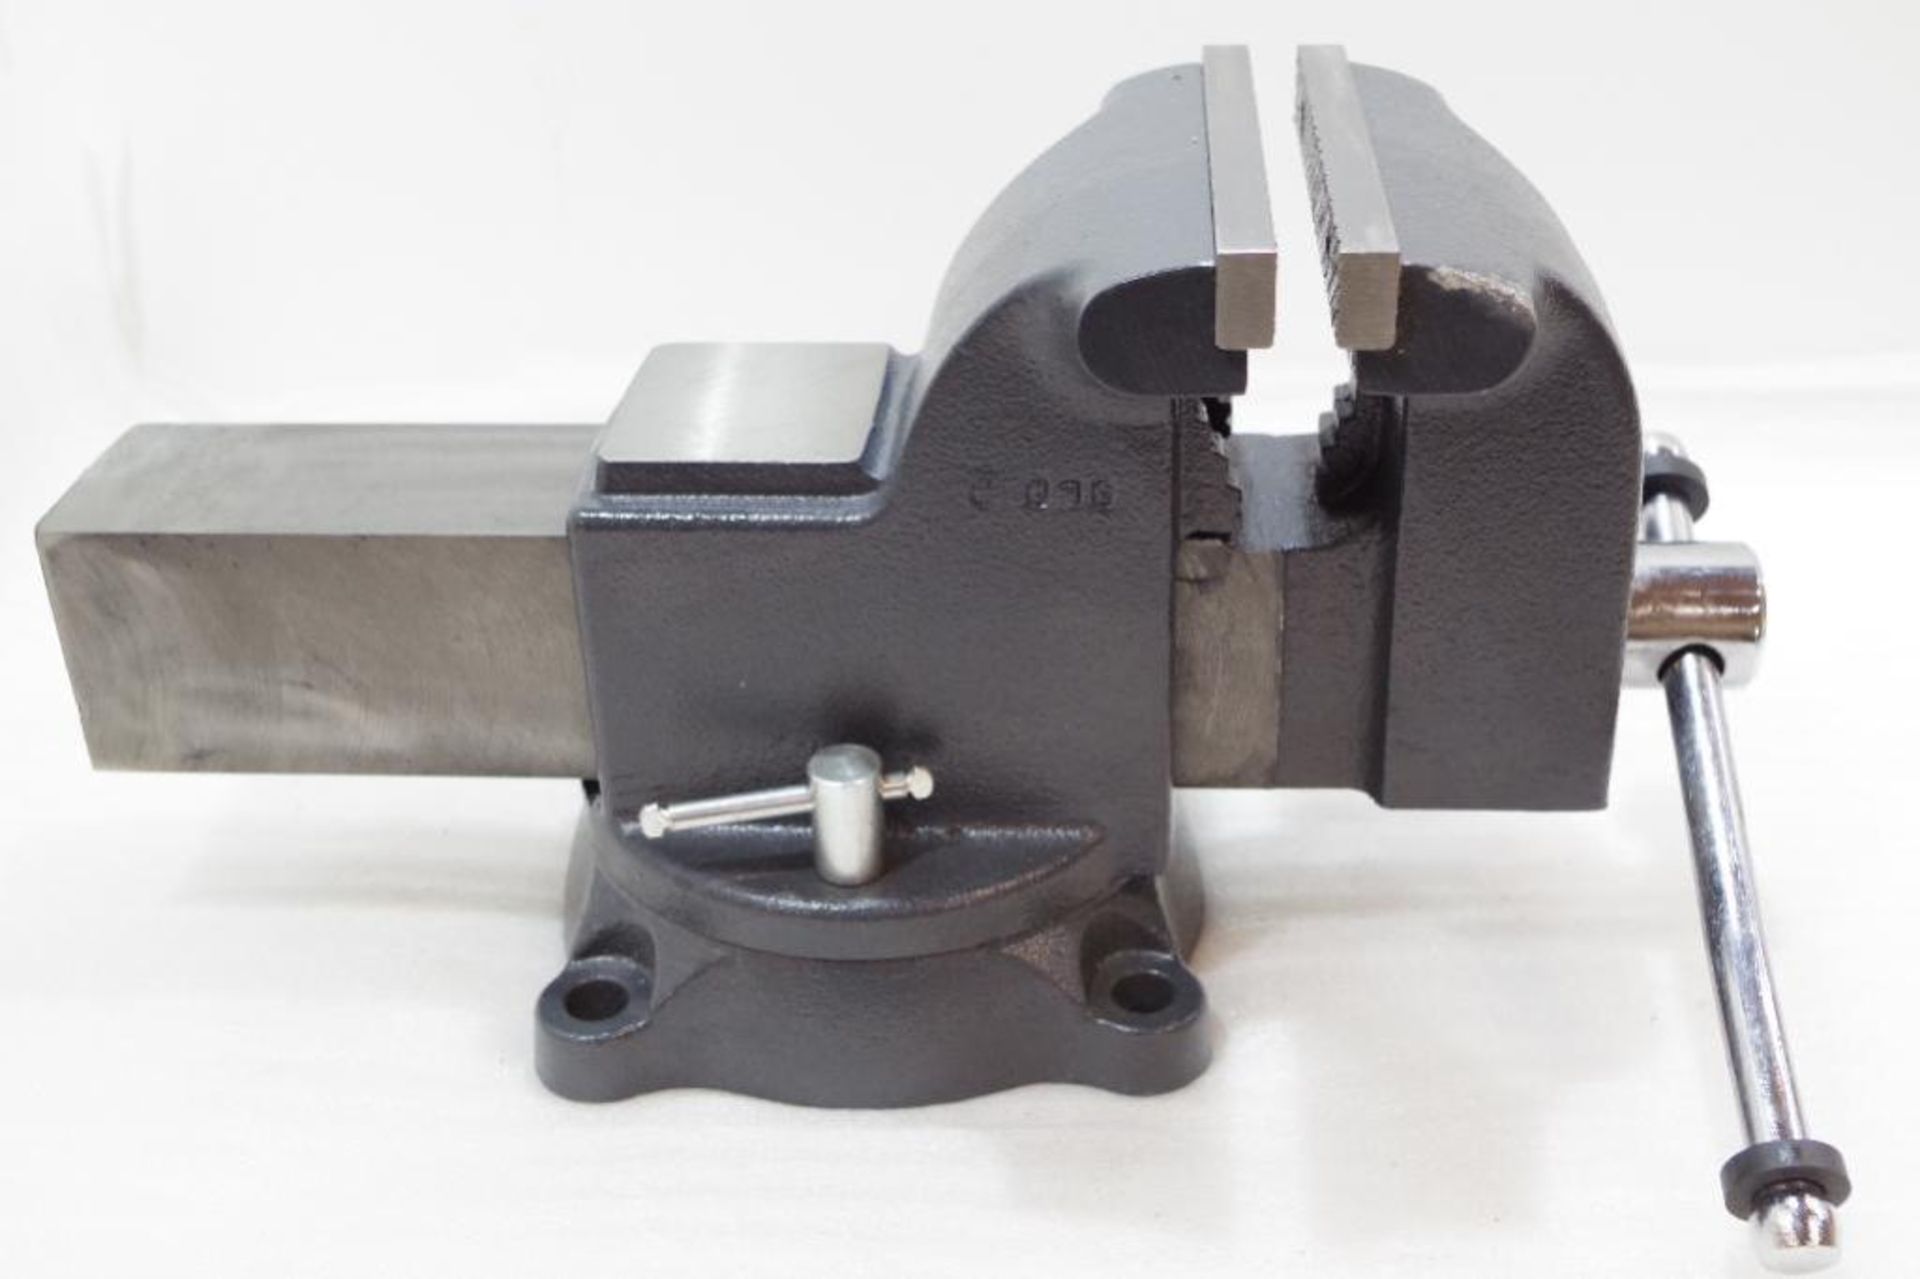 NEW WILTON Bench Vise, 6" Jaw Width - Image 3 of 5